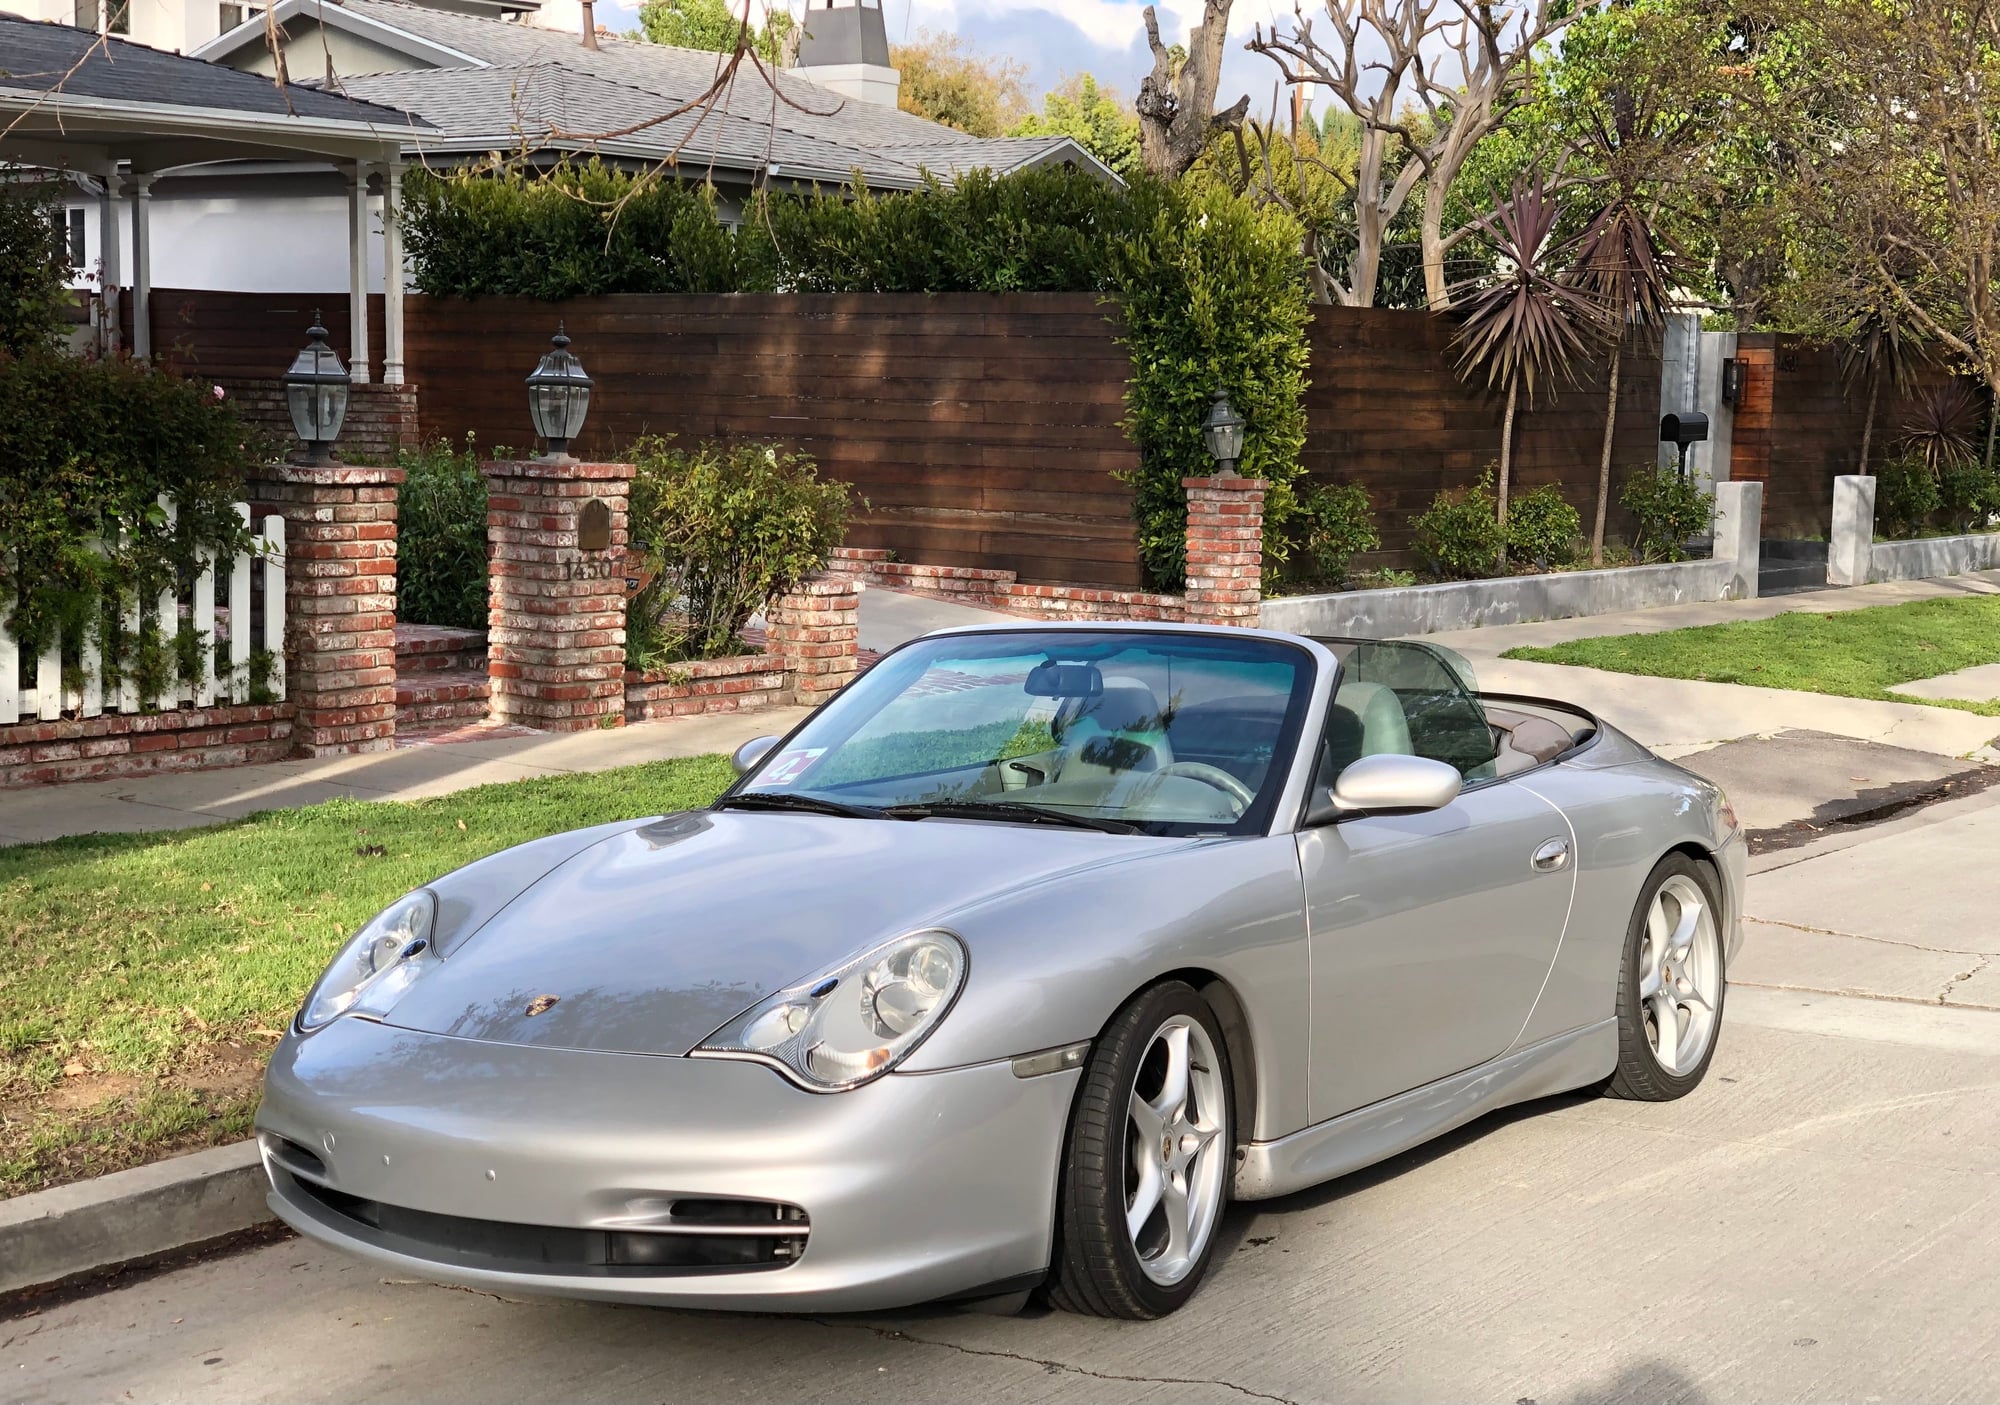 2002 Porsche 911 - C2 Manual with great service history - Used - VIN WP0CA29952S651560 - 82,000 Miles - 6 cyl - 2WD - Manual - Convertible - Silver - Sherman Oaks, CA 91423, United States